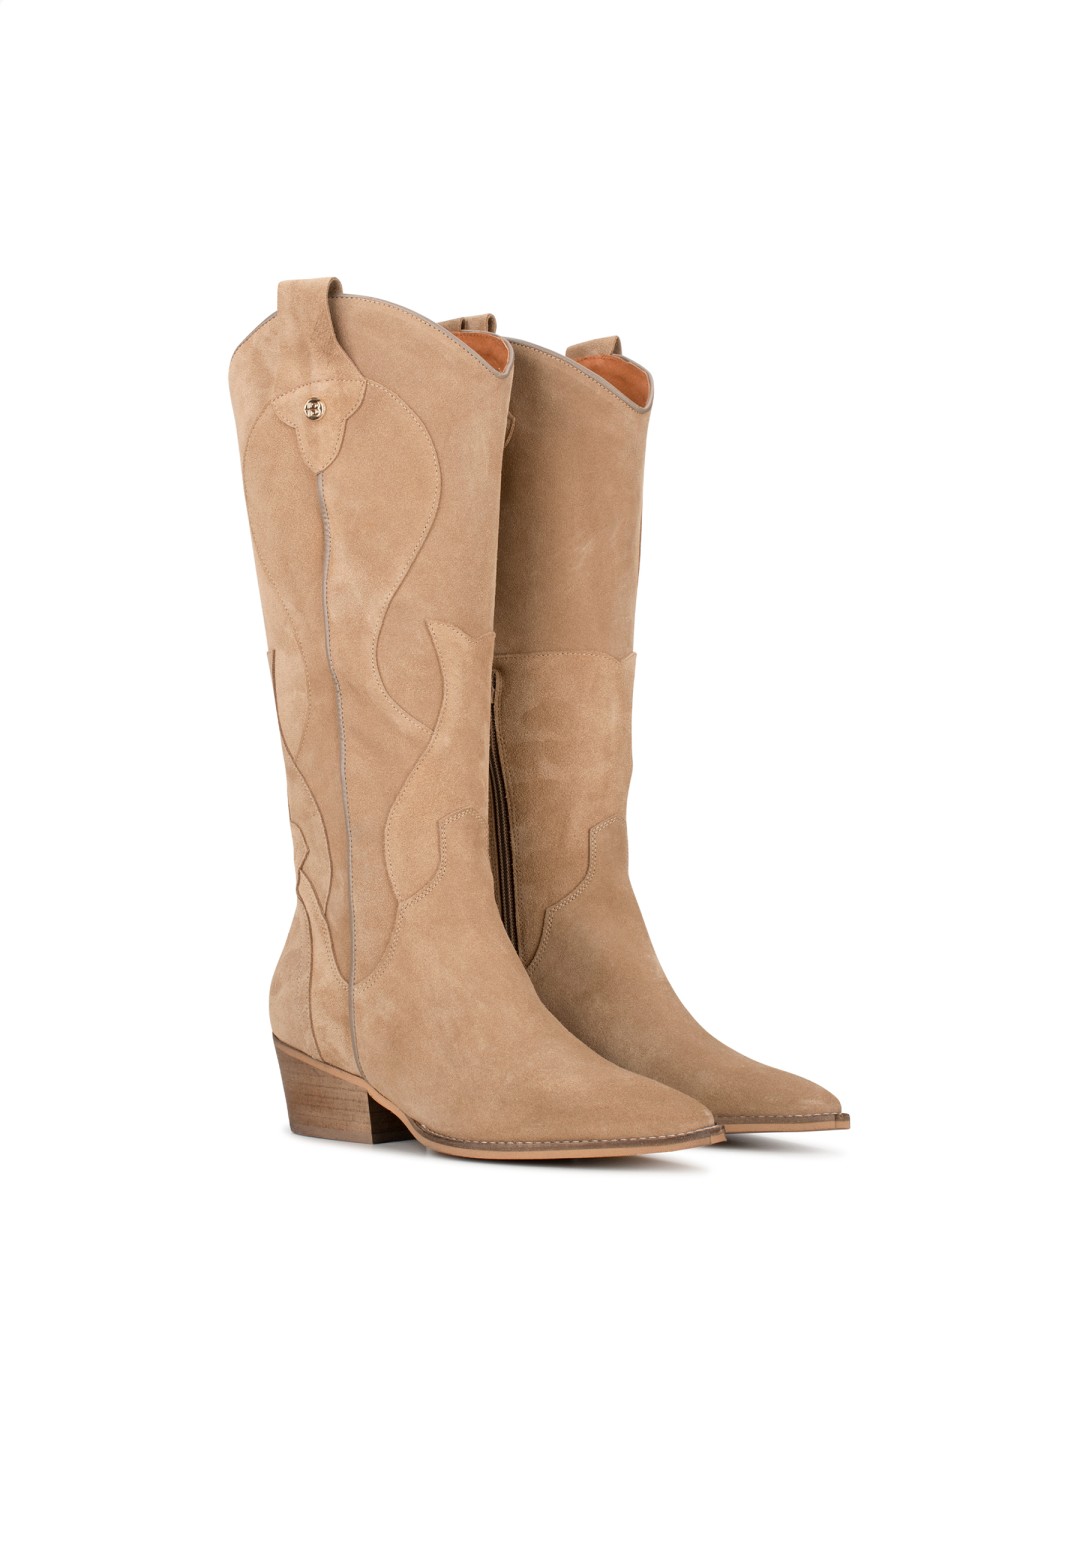 HABOOB Ladies Byblos Western Boots | The Official POELMAN Webshop